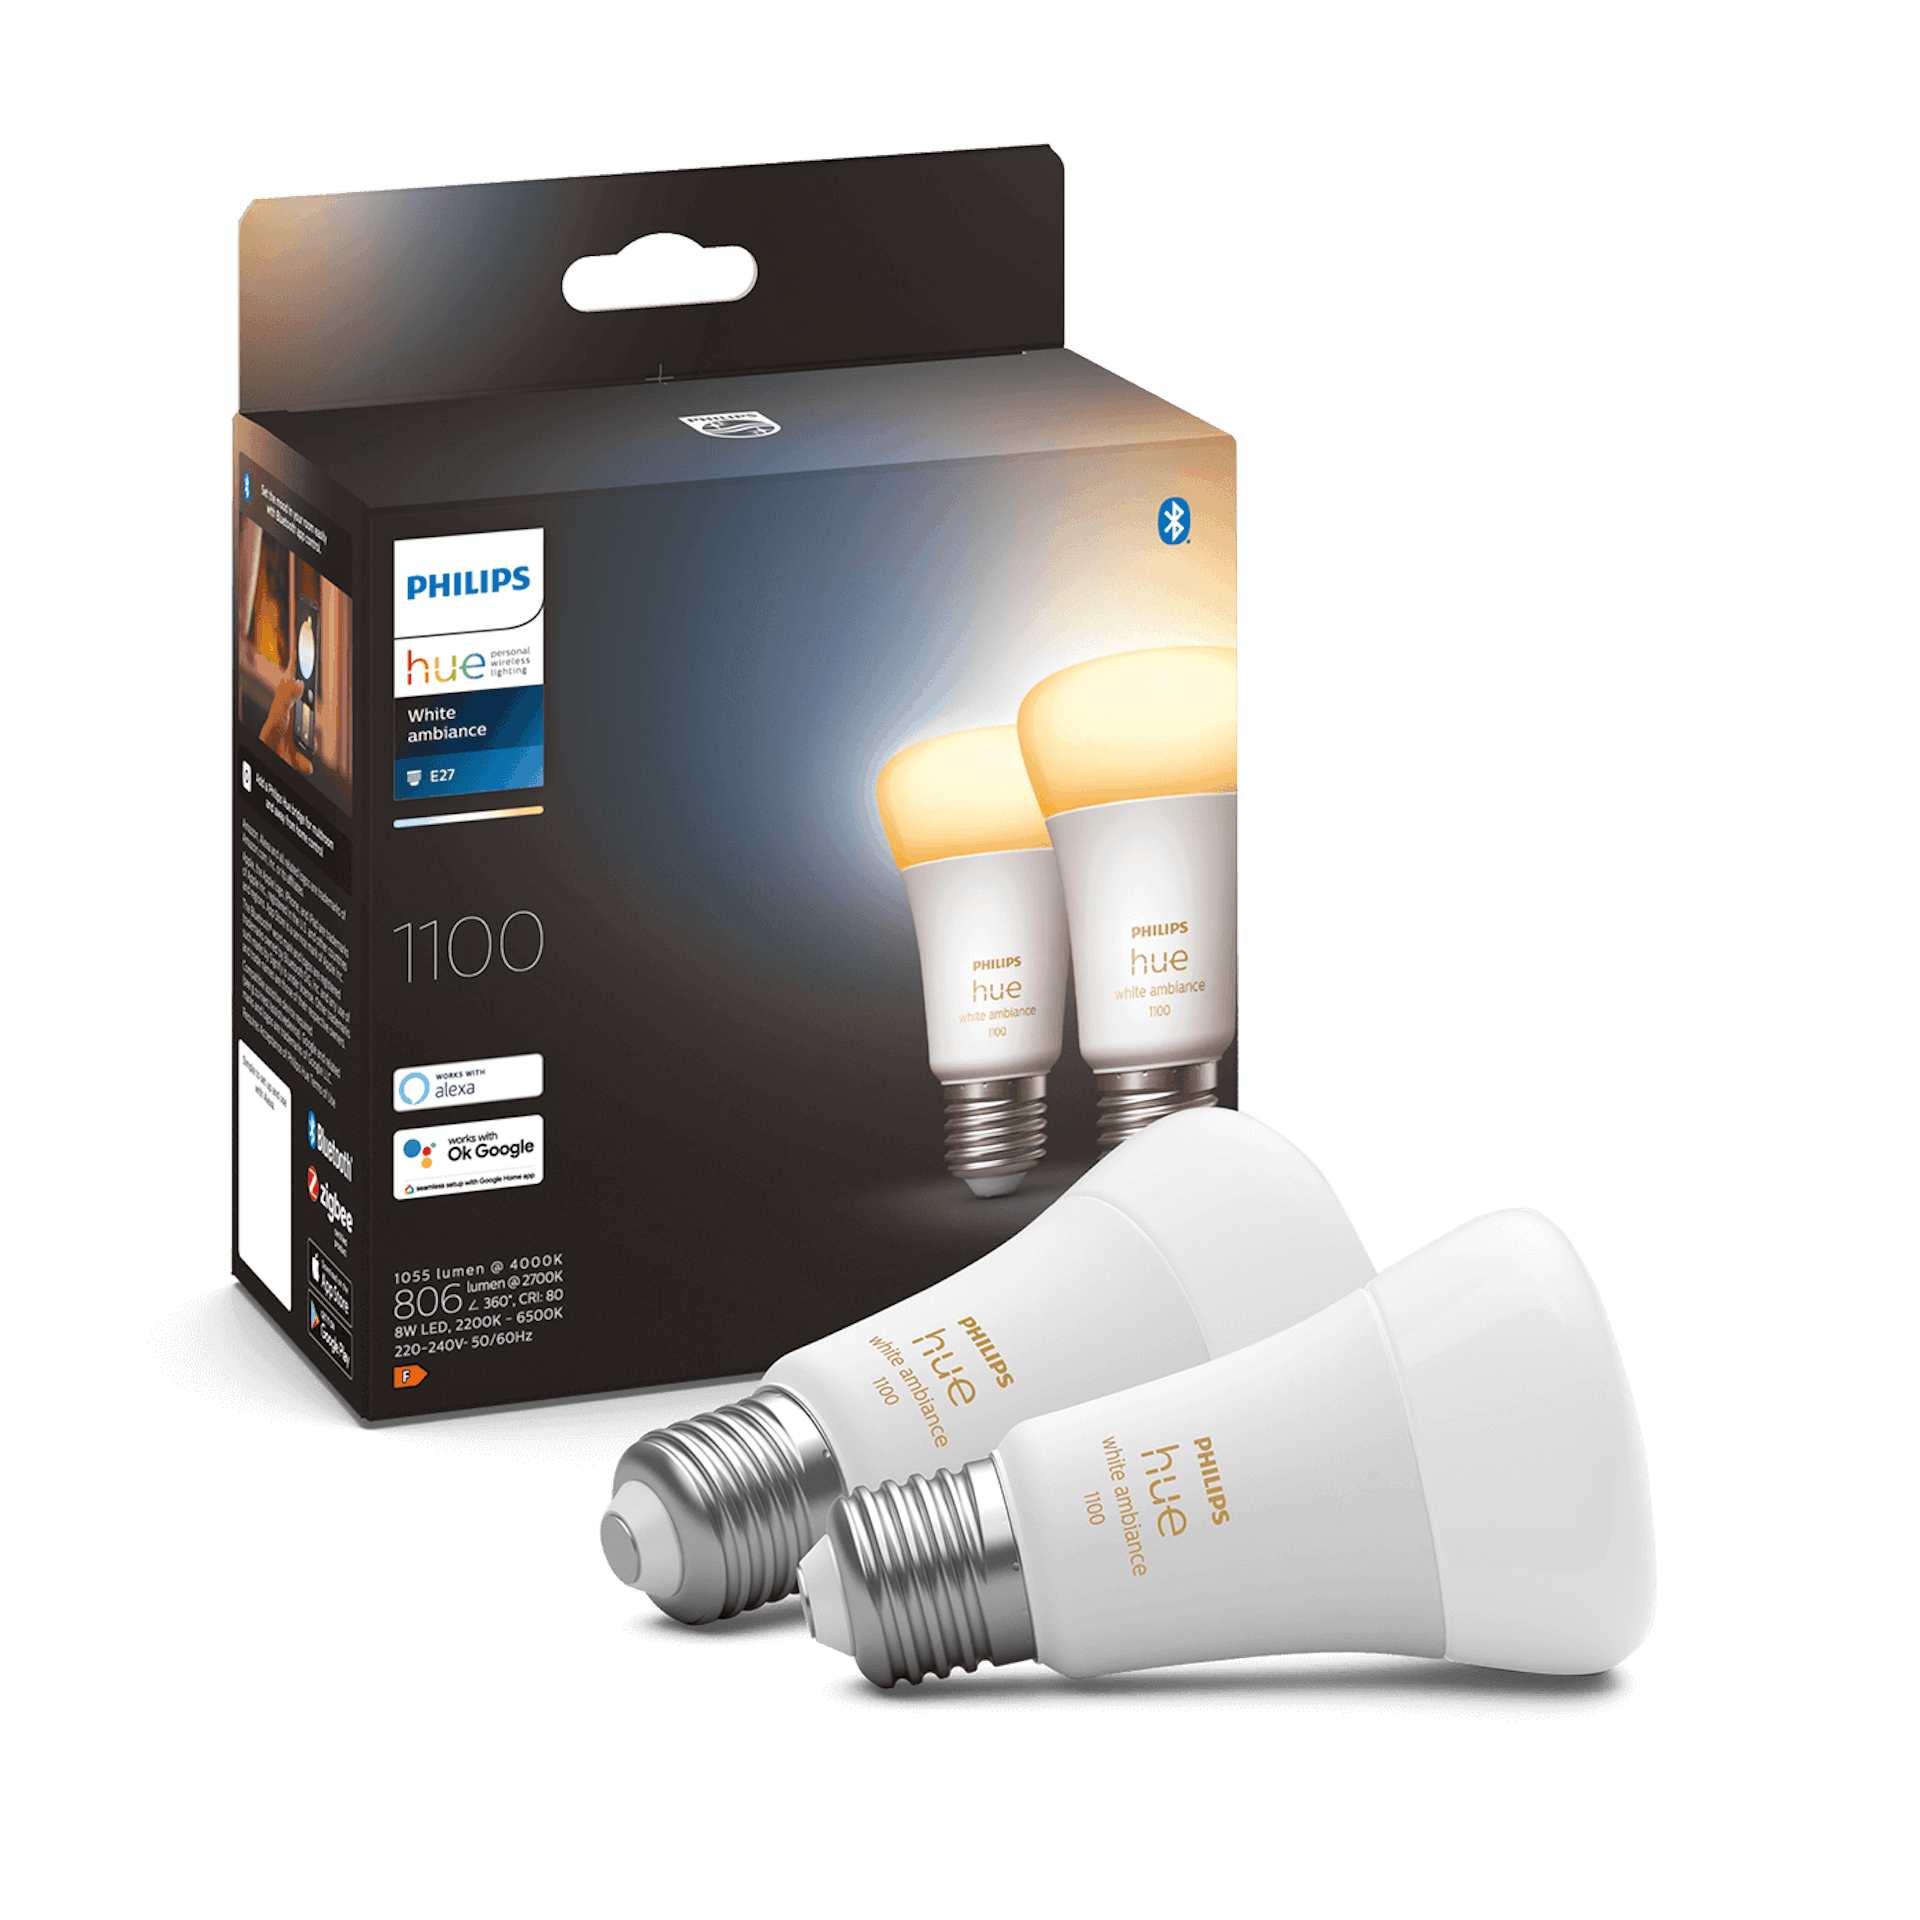 Philips Hue White Ambiance E27 (2-pack) (G2) - Details - Image